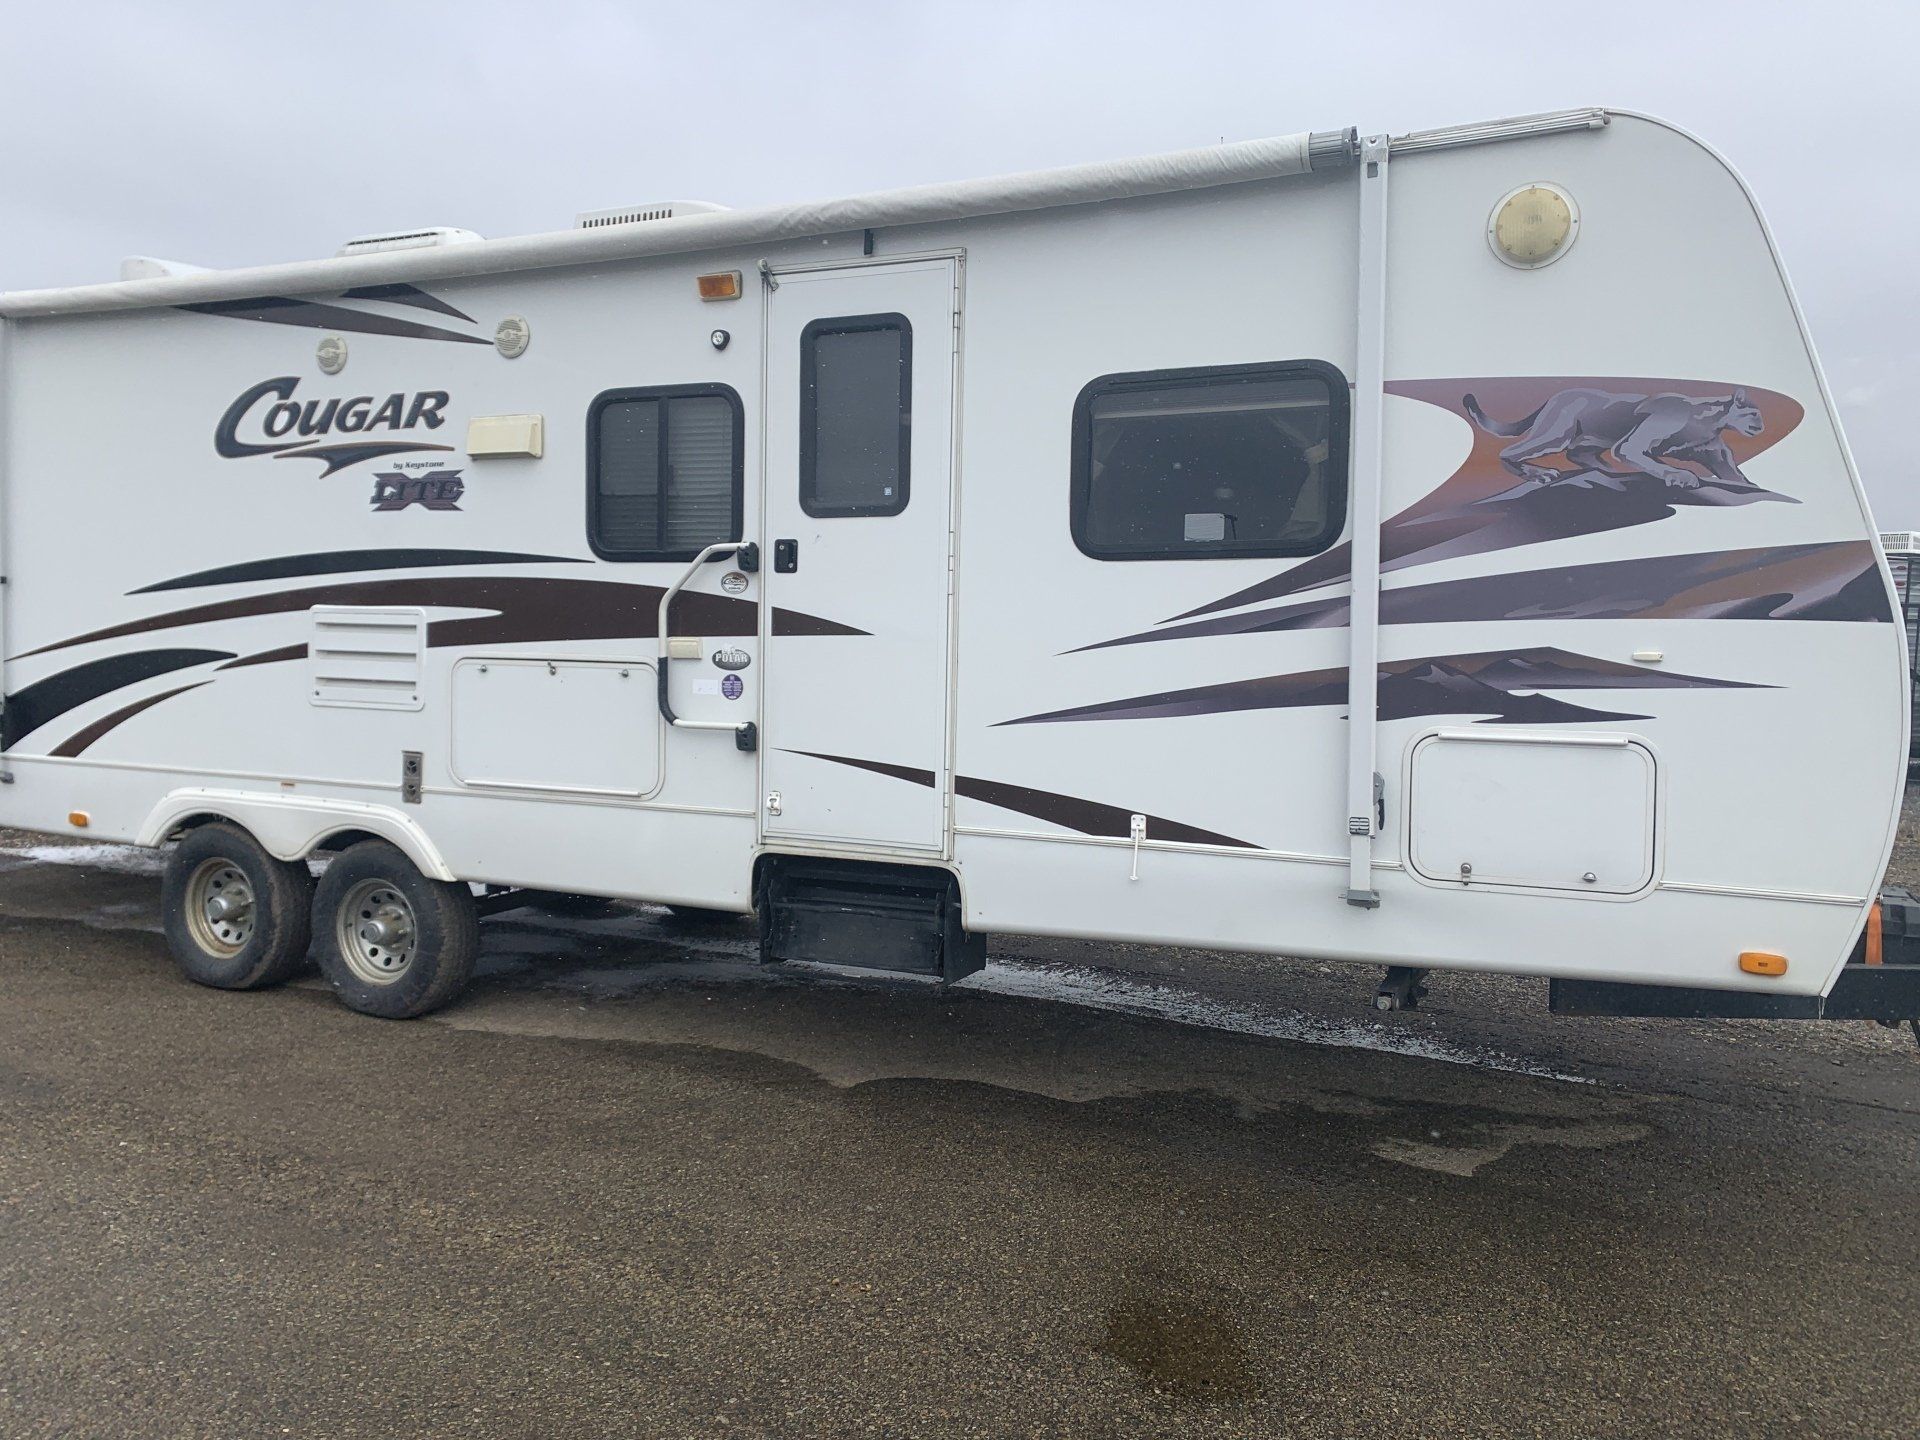 2020 - Alberta's Worst RV Decal Contest - Grand Prize Winner - Before & After - Pic 4